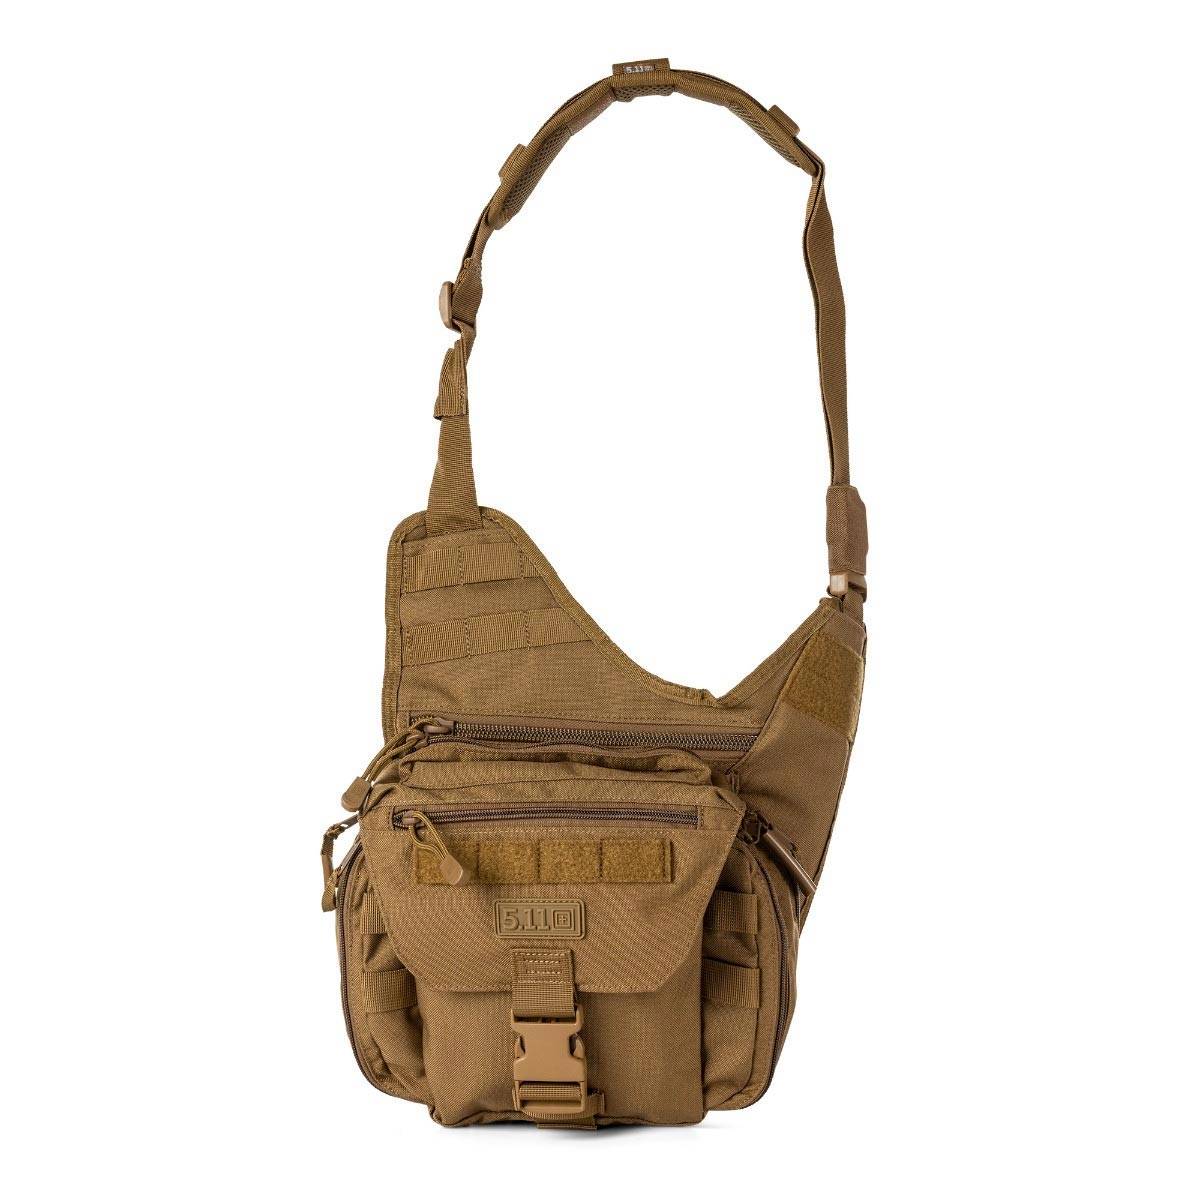 5.11 TACTICAL PUSH PACK